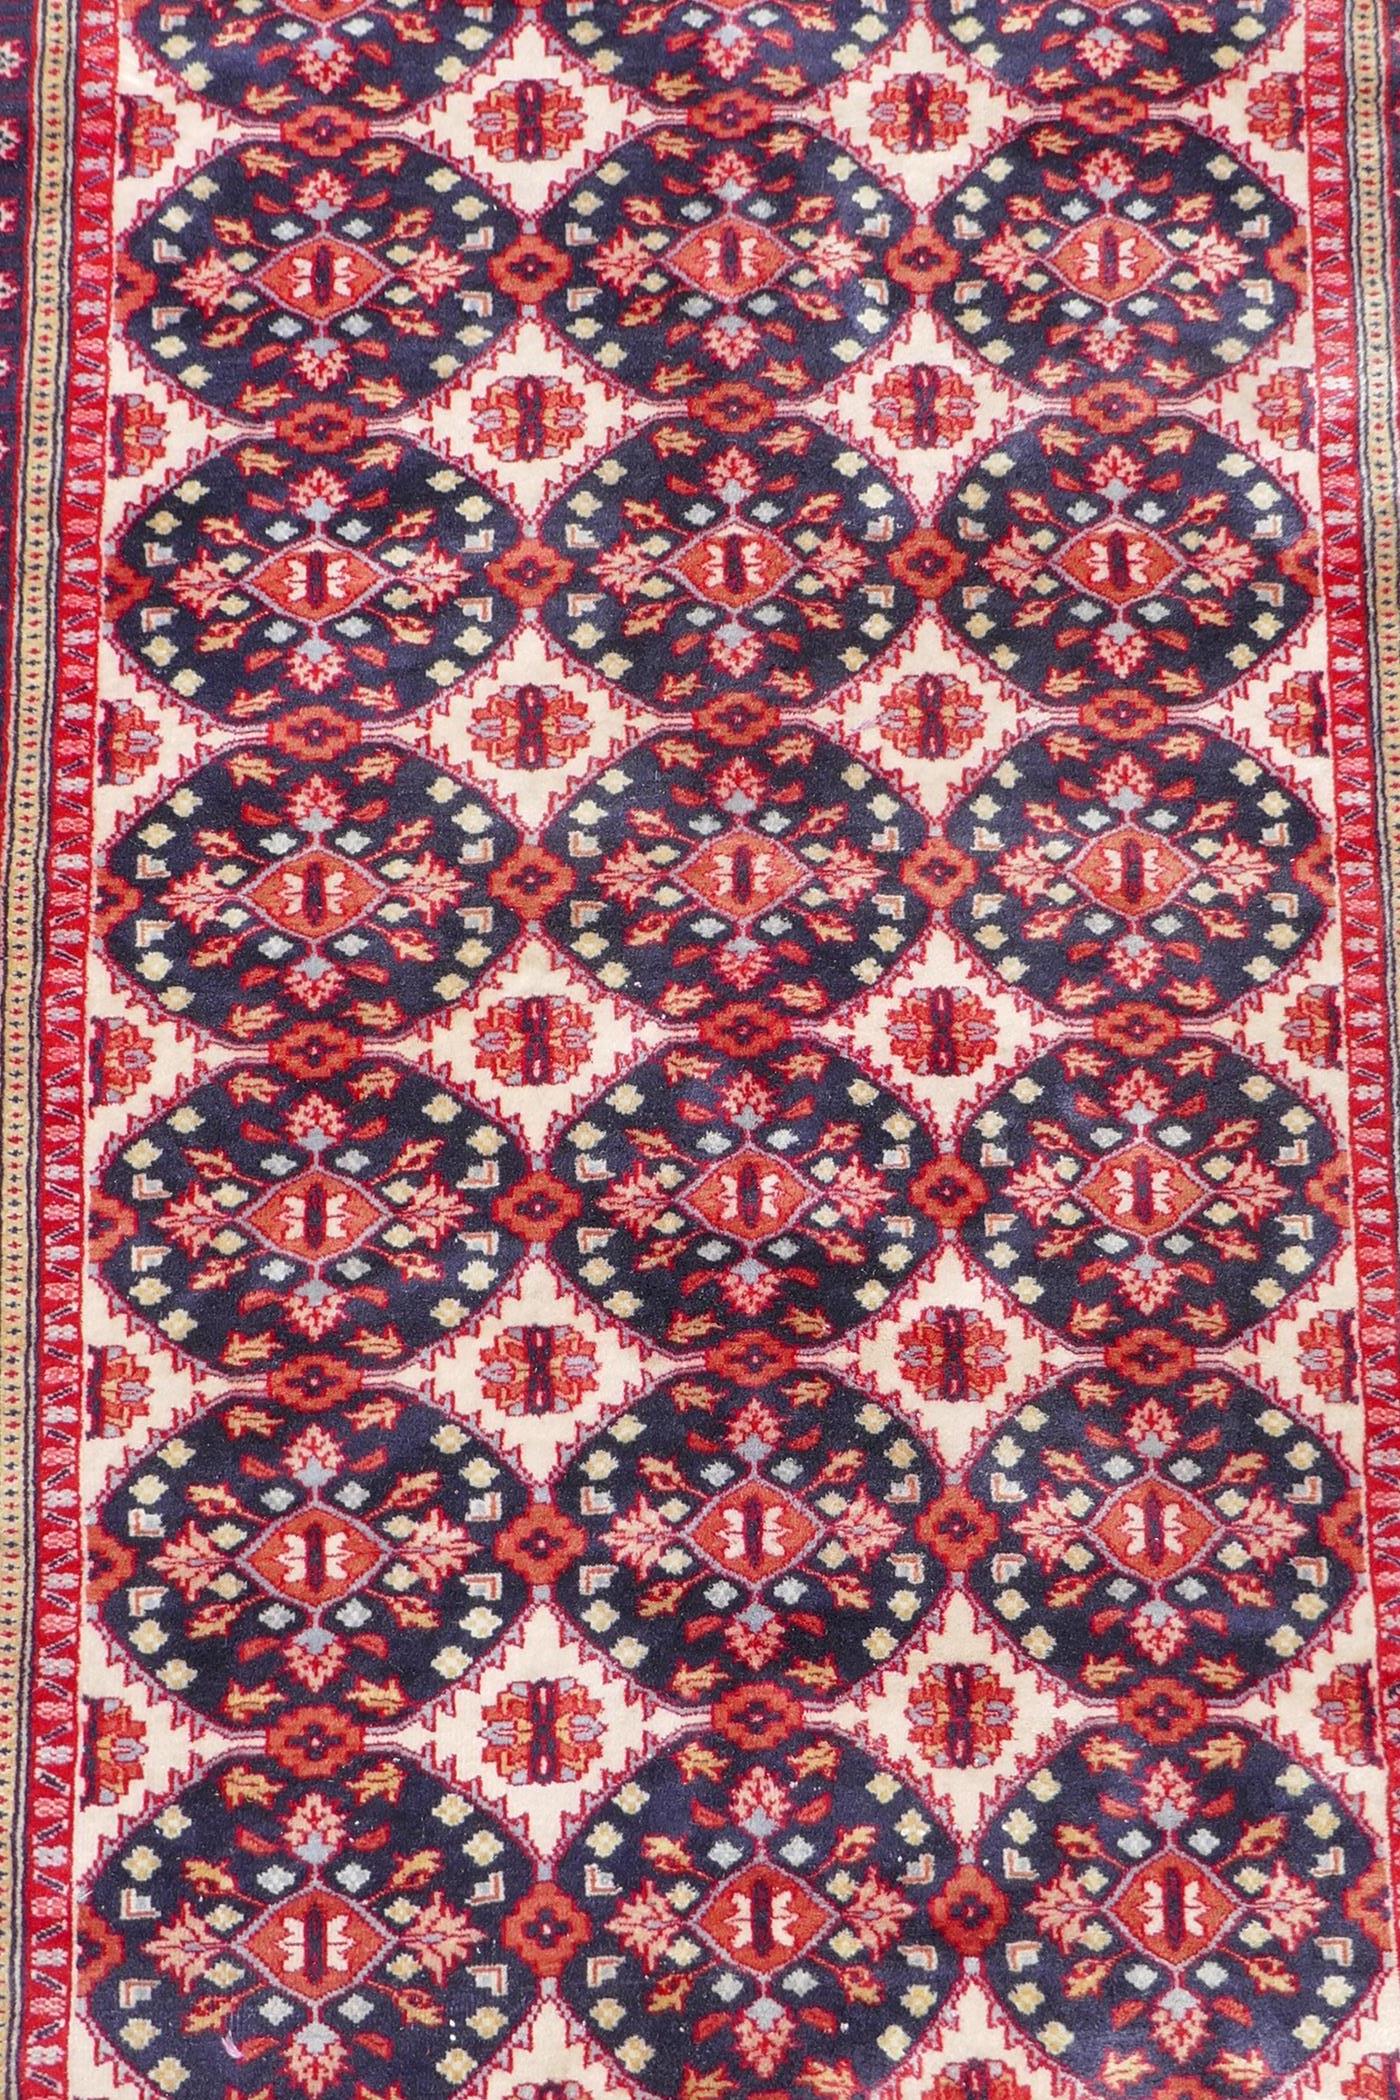 A Persian wool rug with Bokhara style medallion design and blue borders, 125cm x 180cm - Image 2 of 4